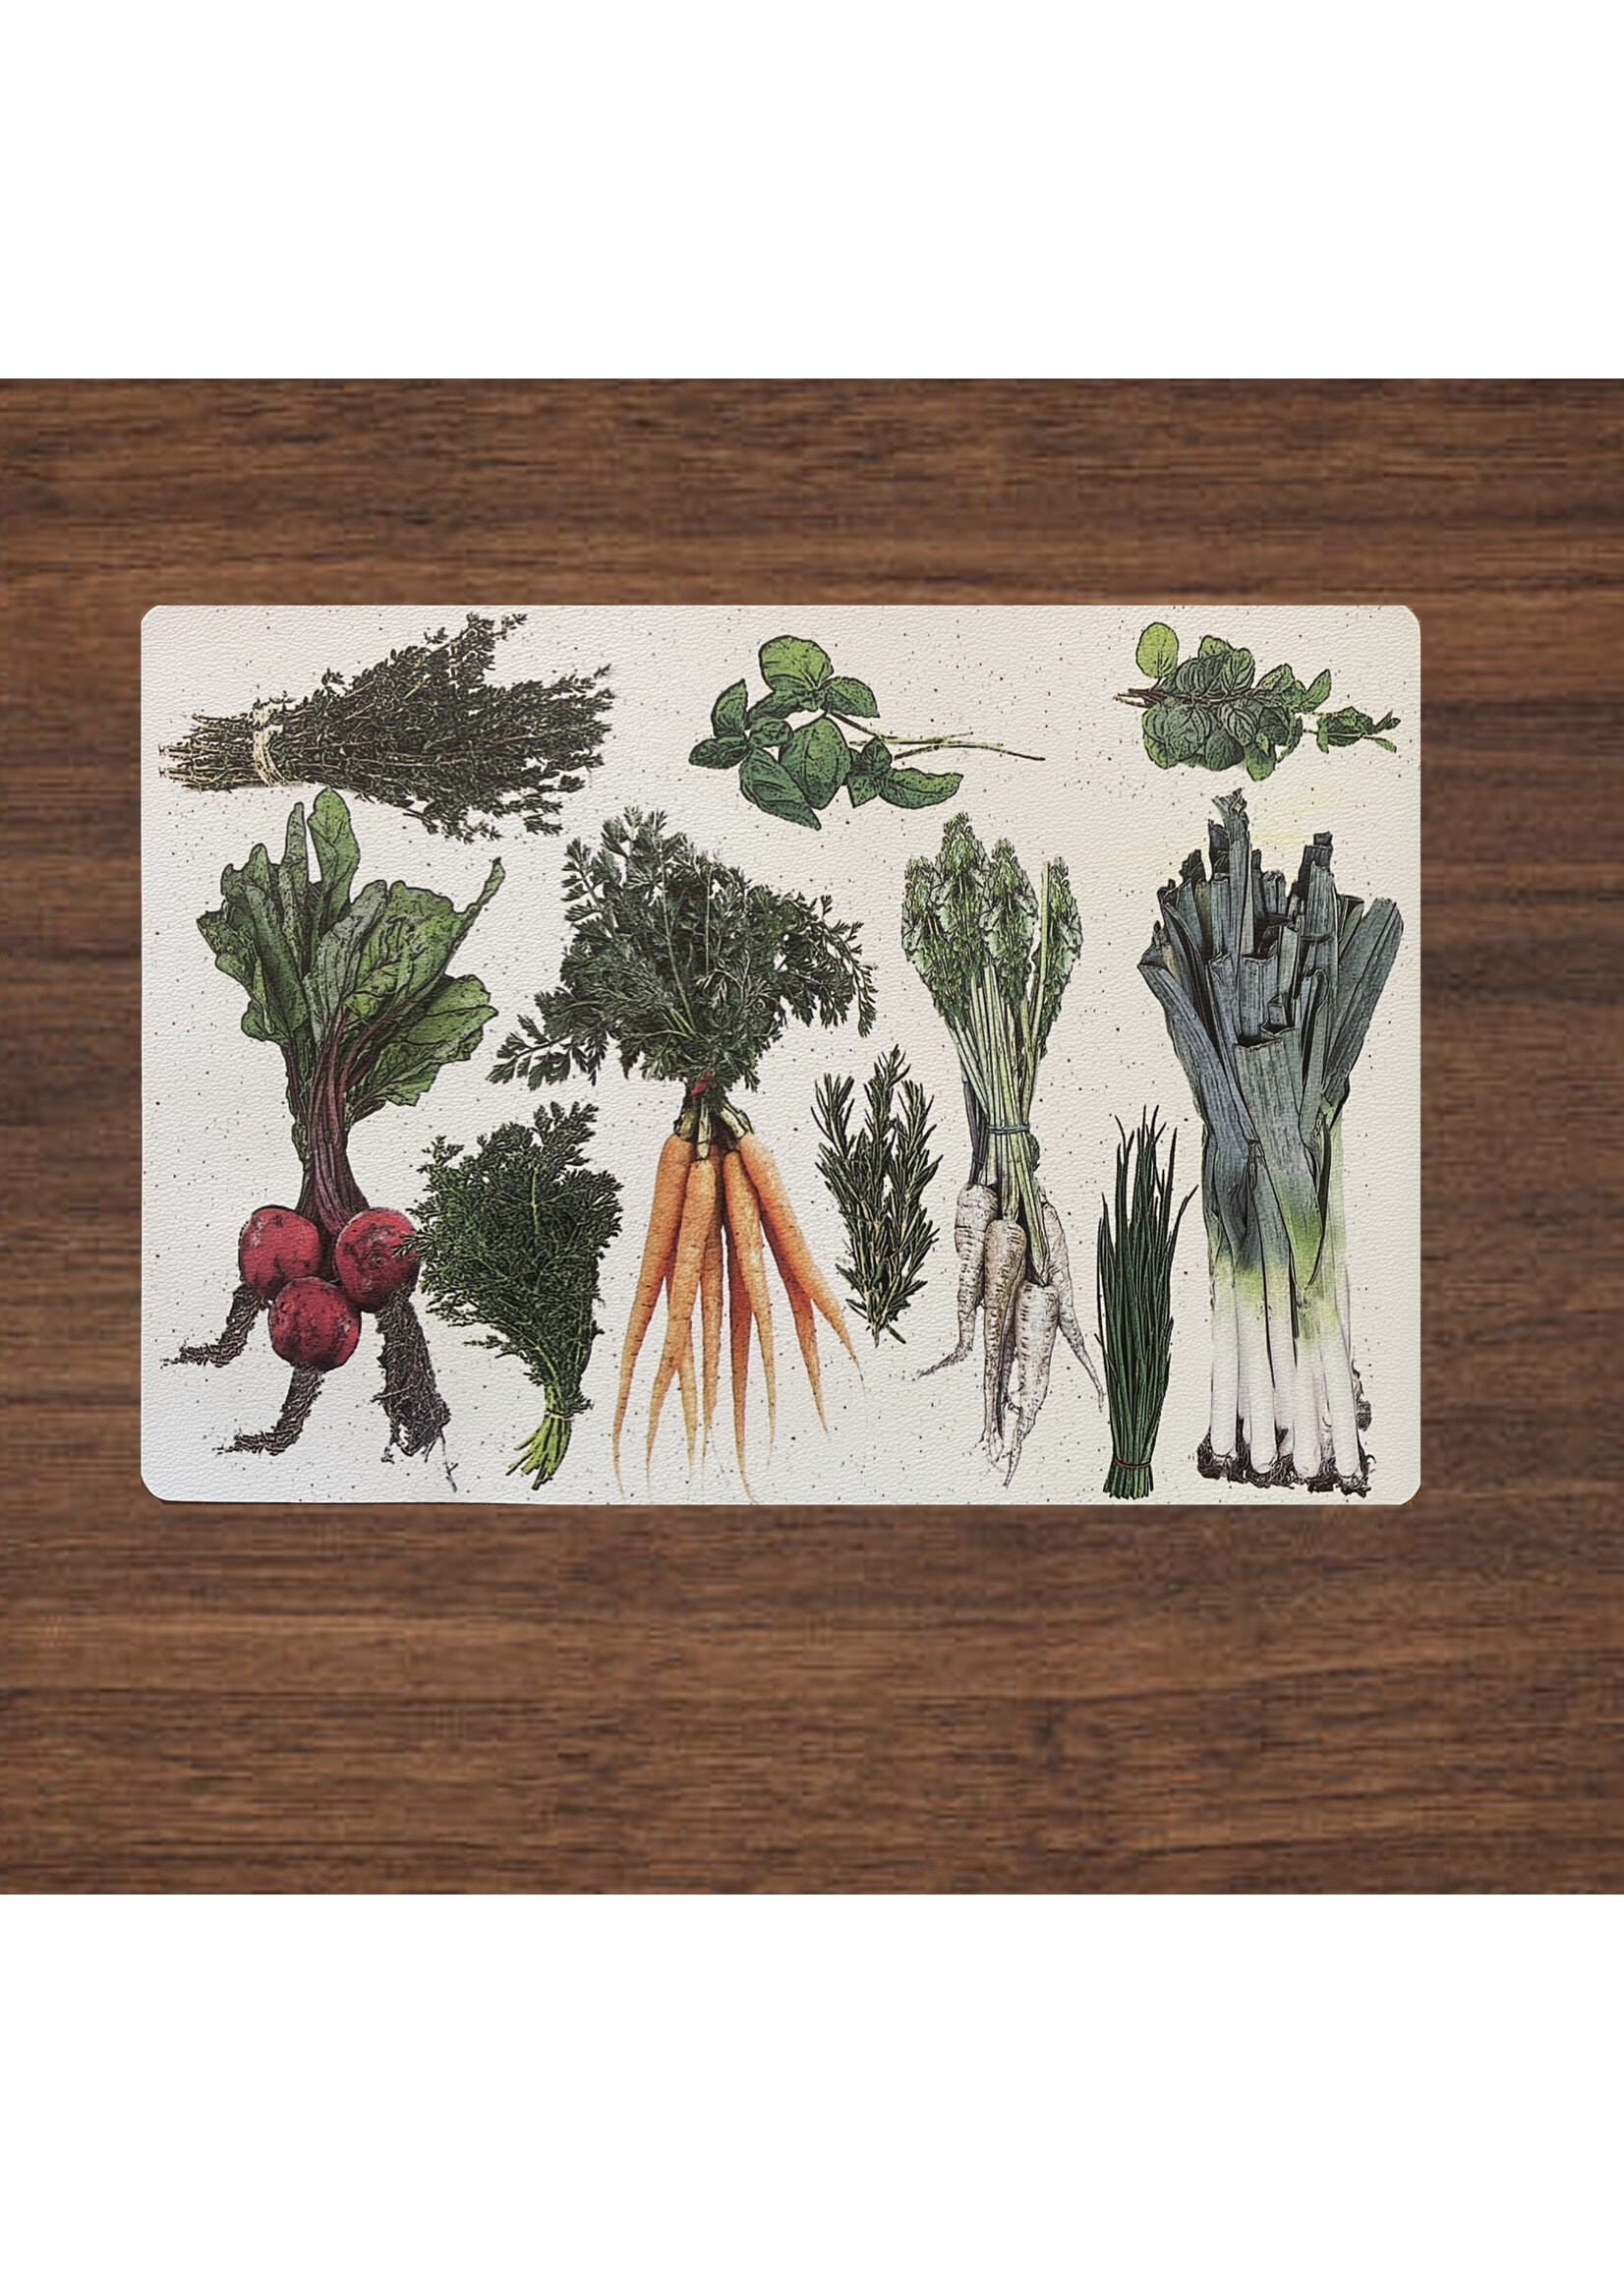 Alphie and Ollie vegetables and herbs vinyl placemat 12 x 17 inches